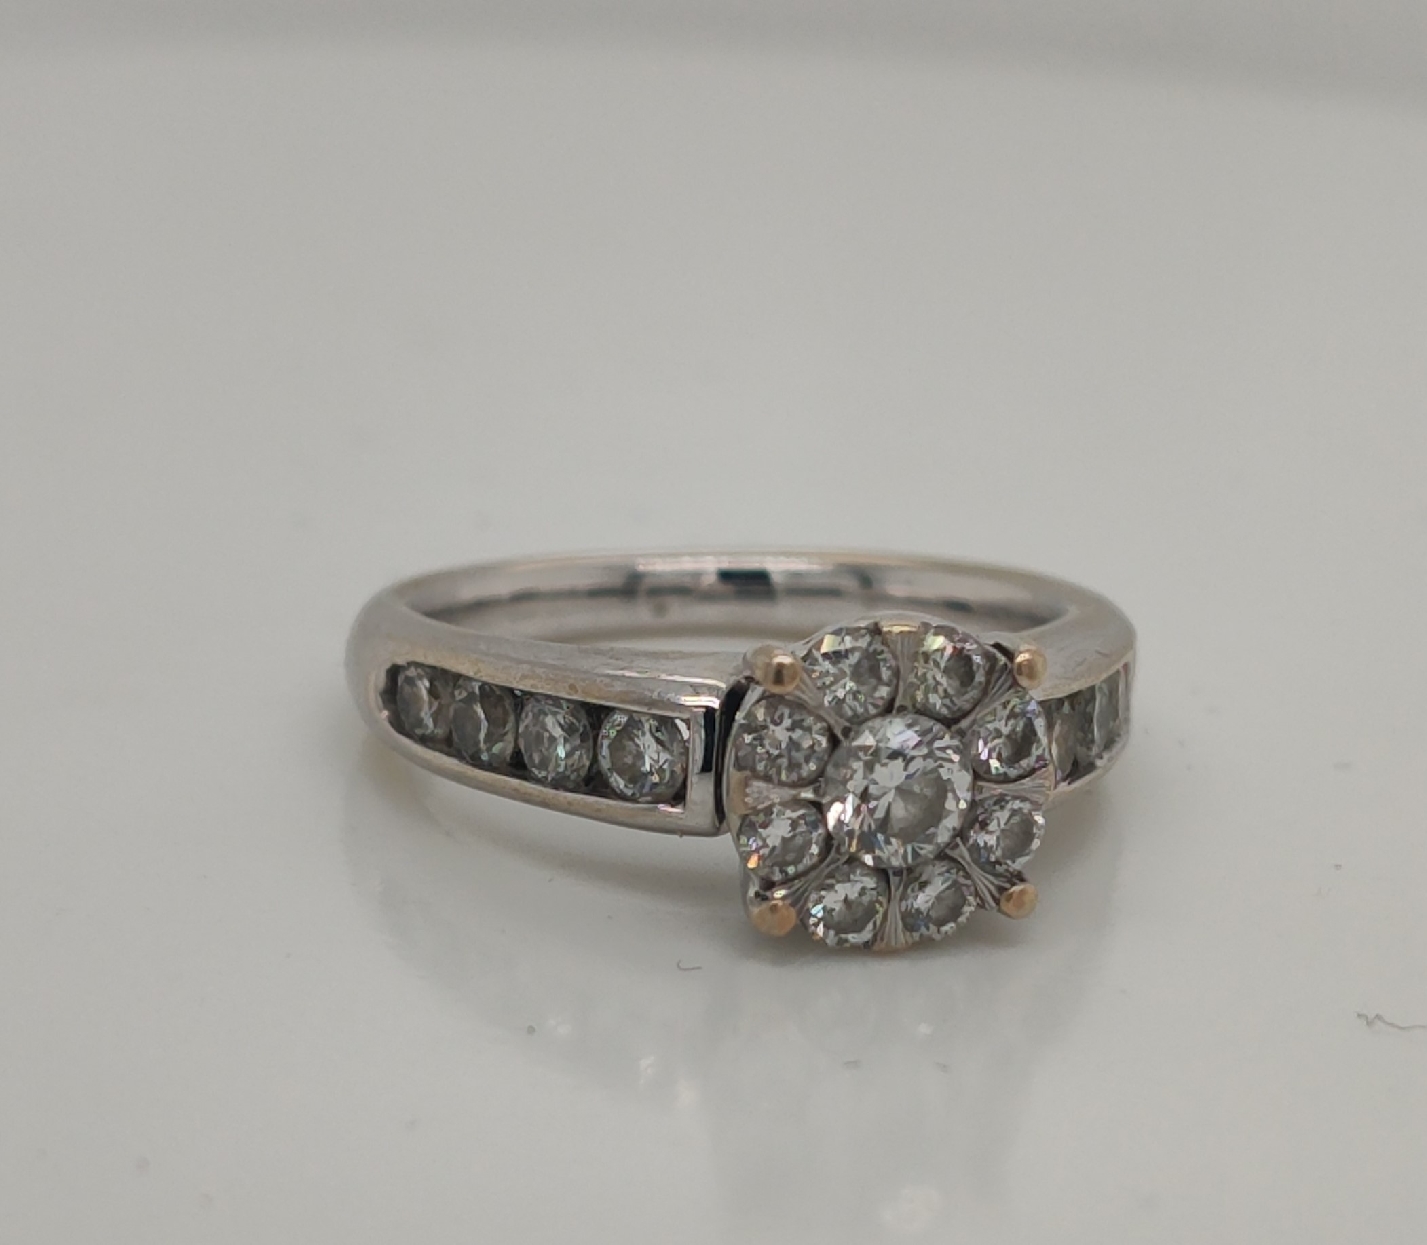 14K White Gold Cluster Engagement Ring with Channel set Diamonds on band Size 6.75